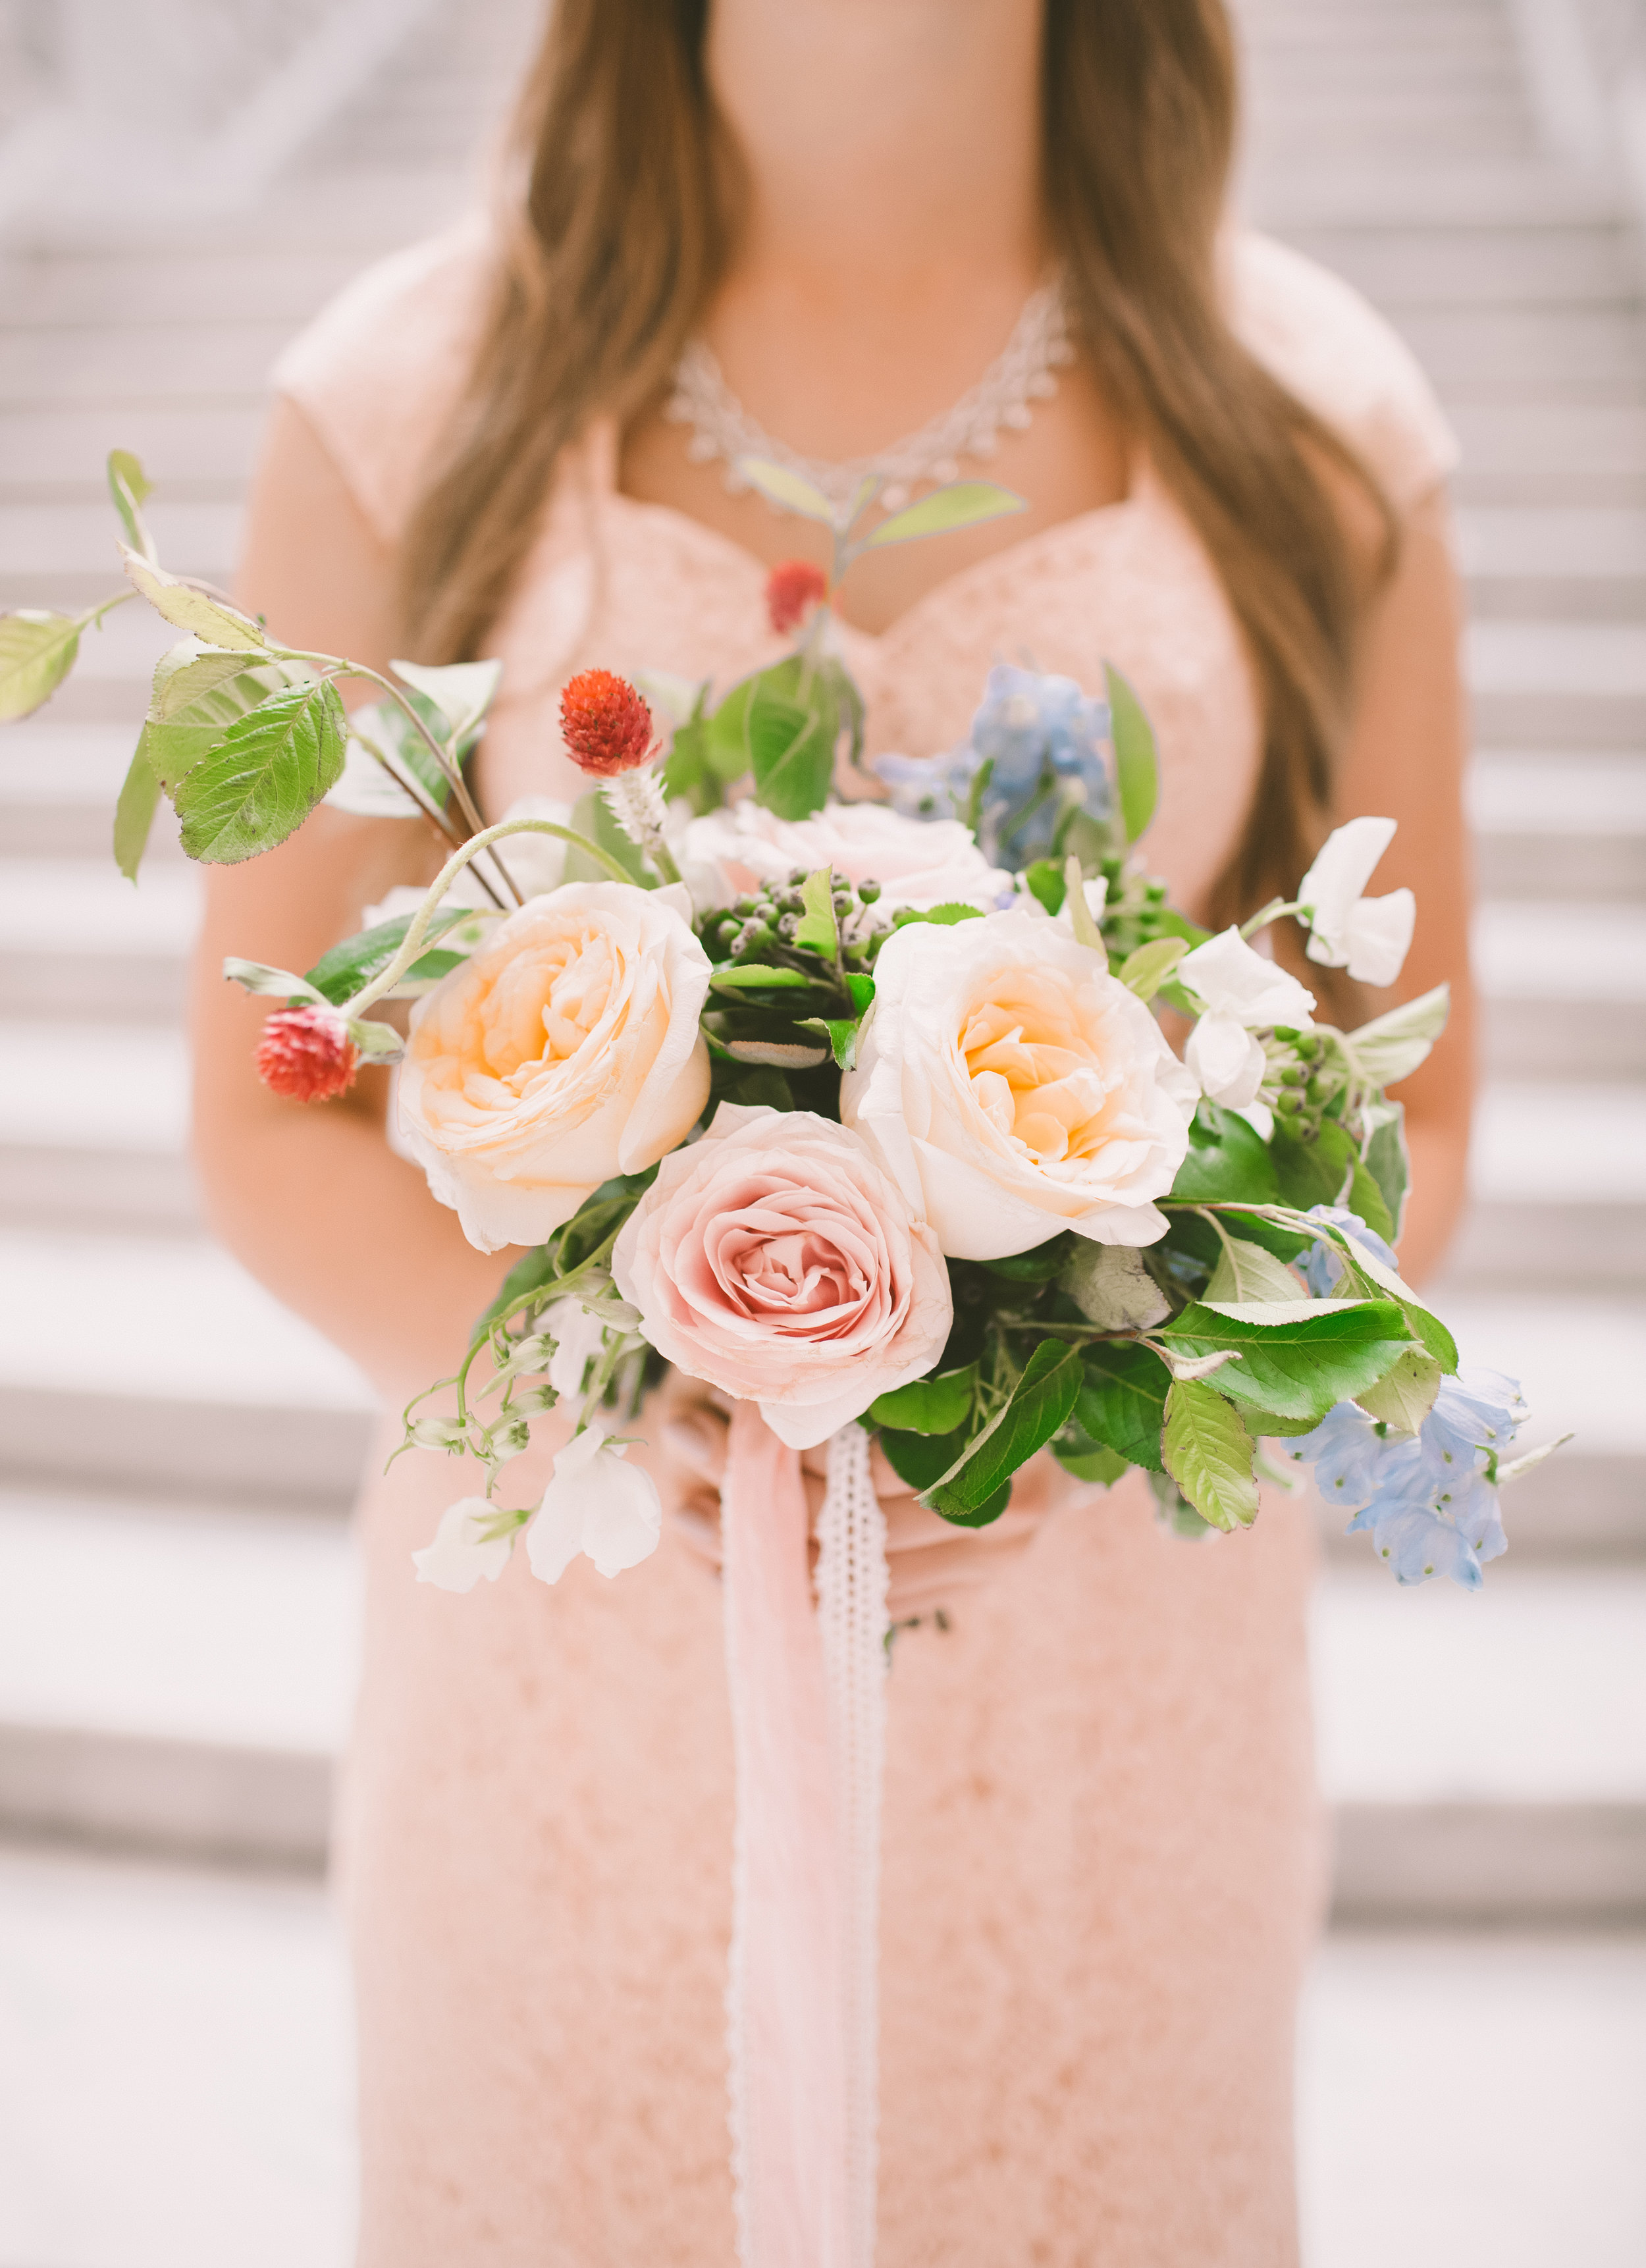 Utah State Capitol Wedding | Colorful Summer Wedding | Michelle Leo Events | Utah Event Planner and Designer | Jessica Janae Photography